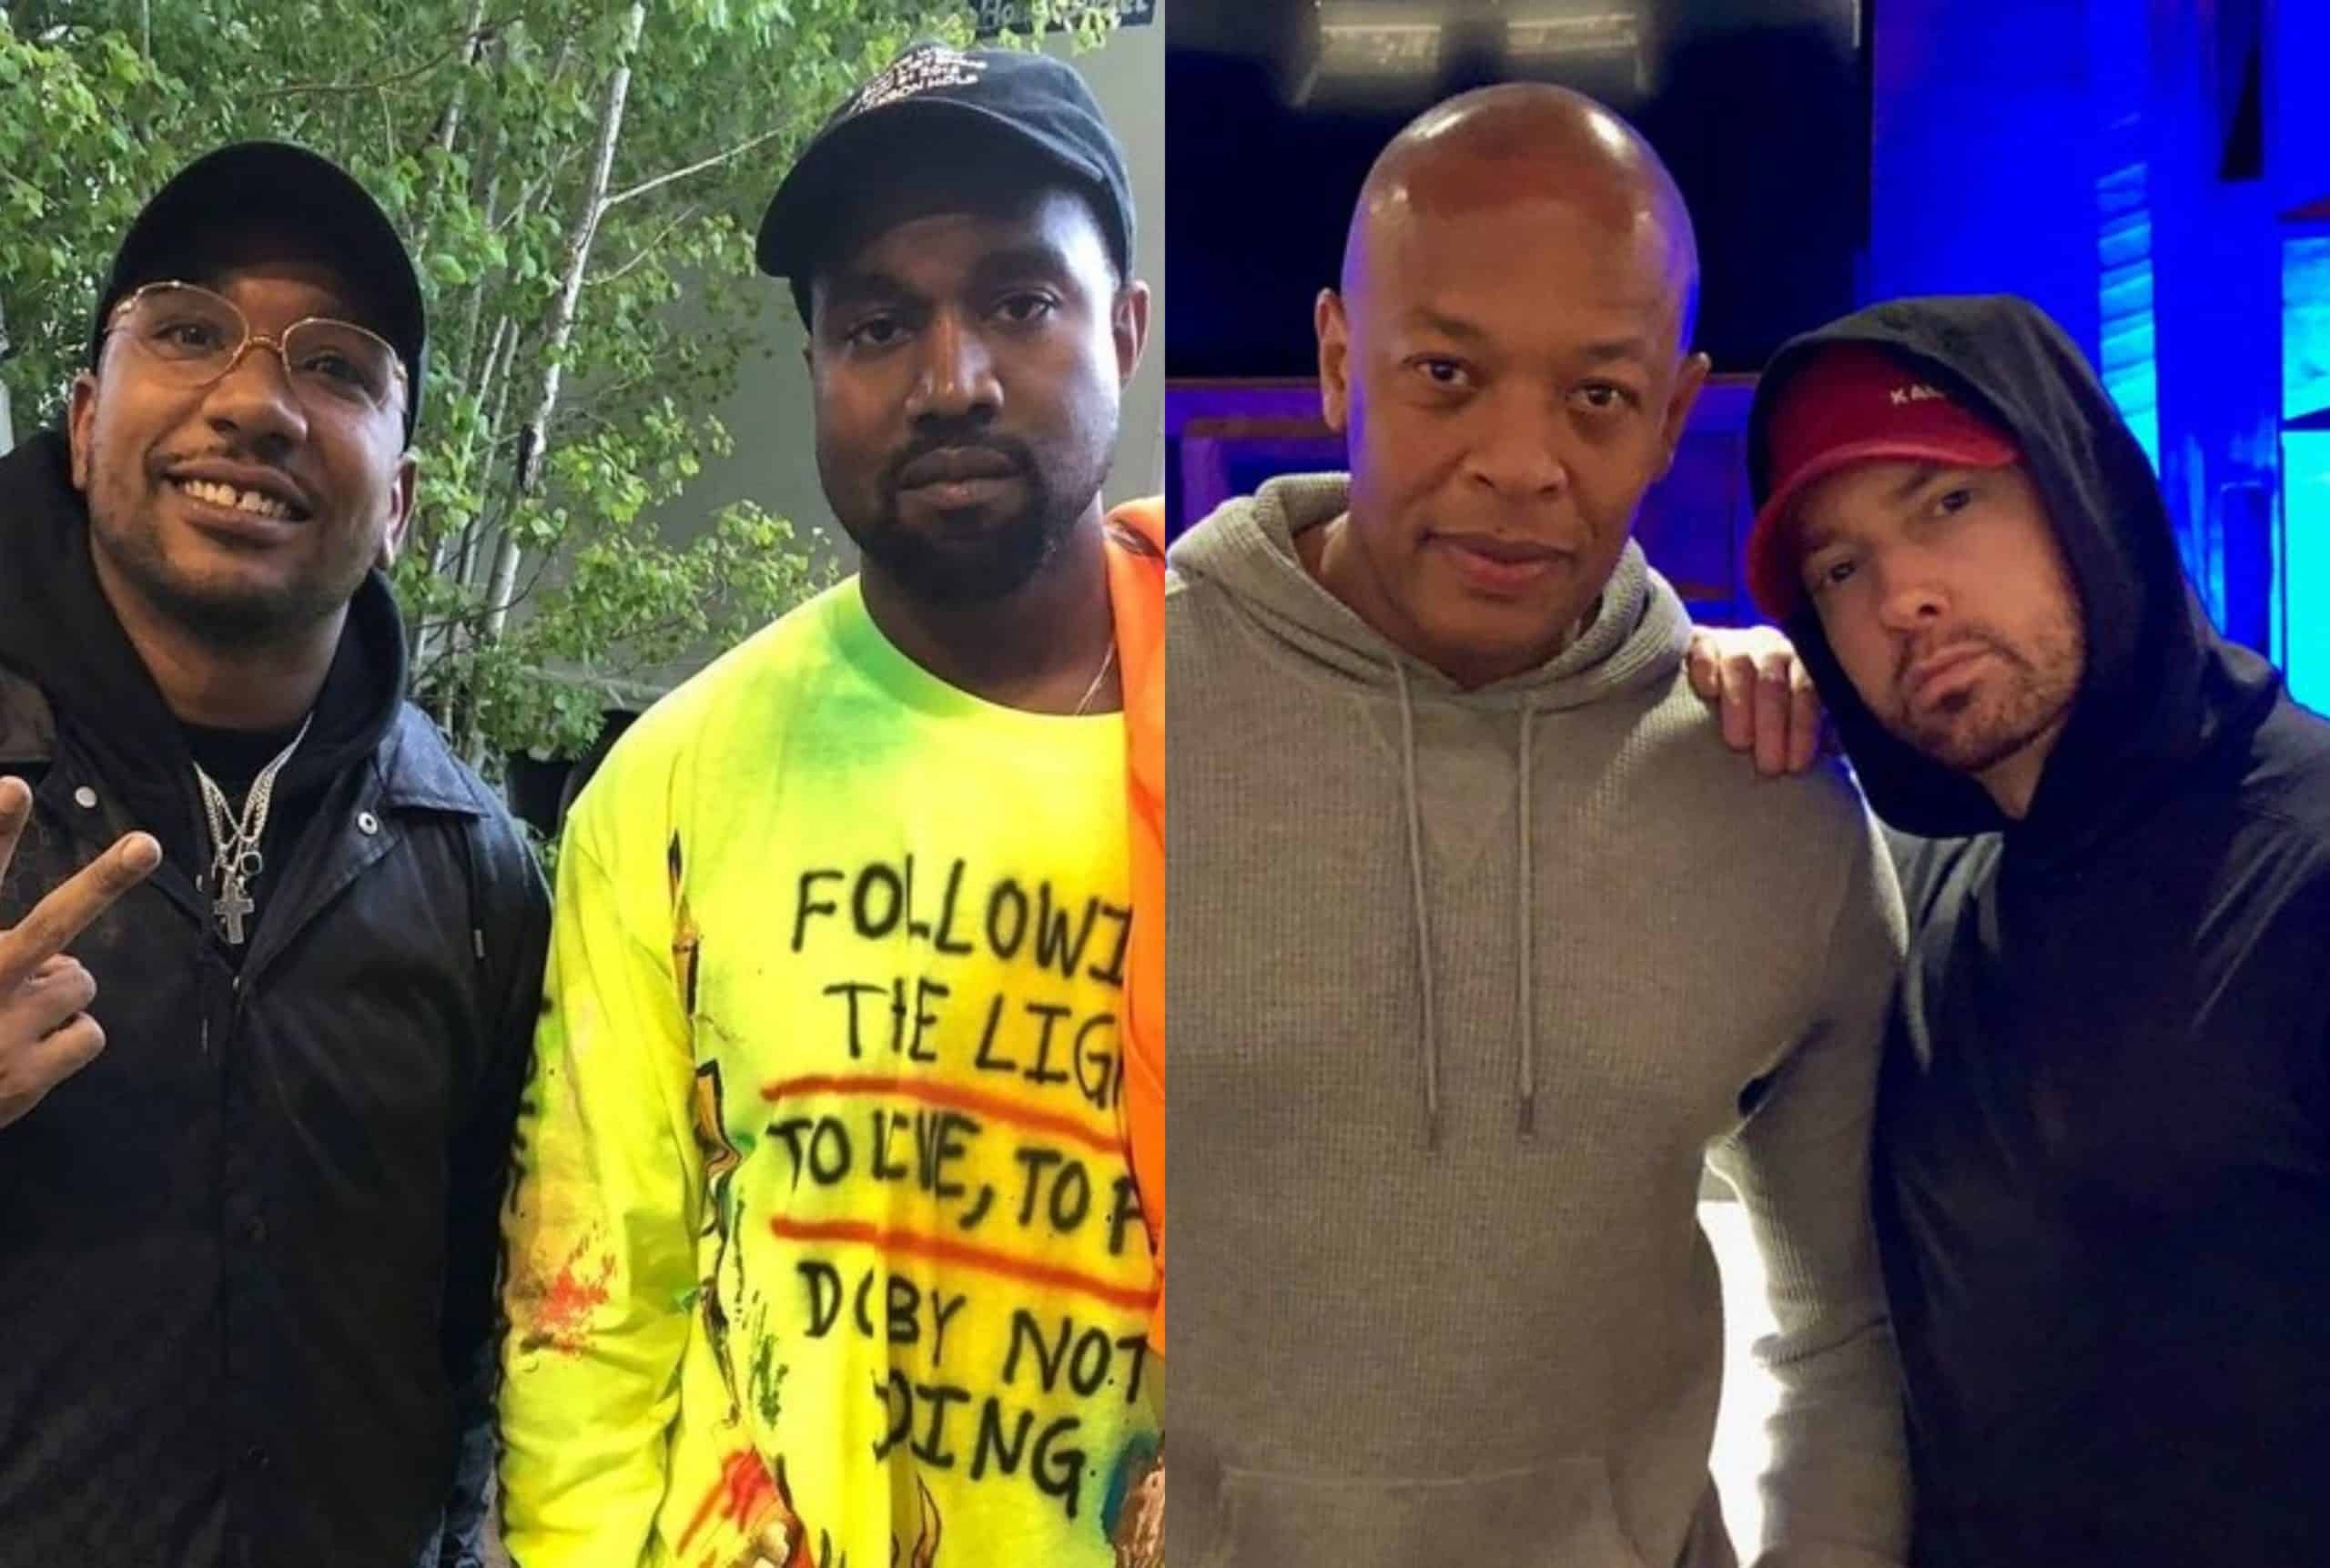 CyHi The Prynce Says Kanye West Diss Was Planned For Their Joint Dr. Dre & Eminem Type Album